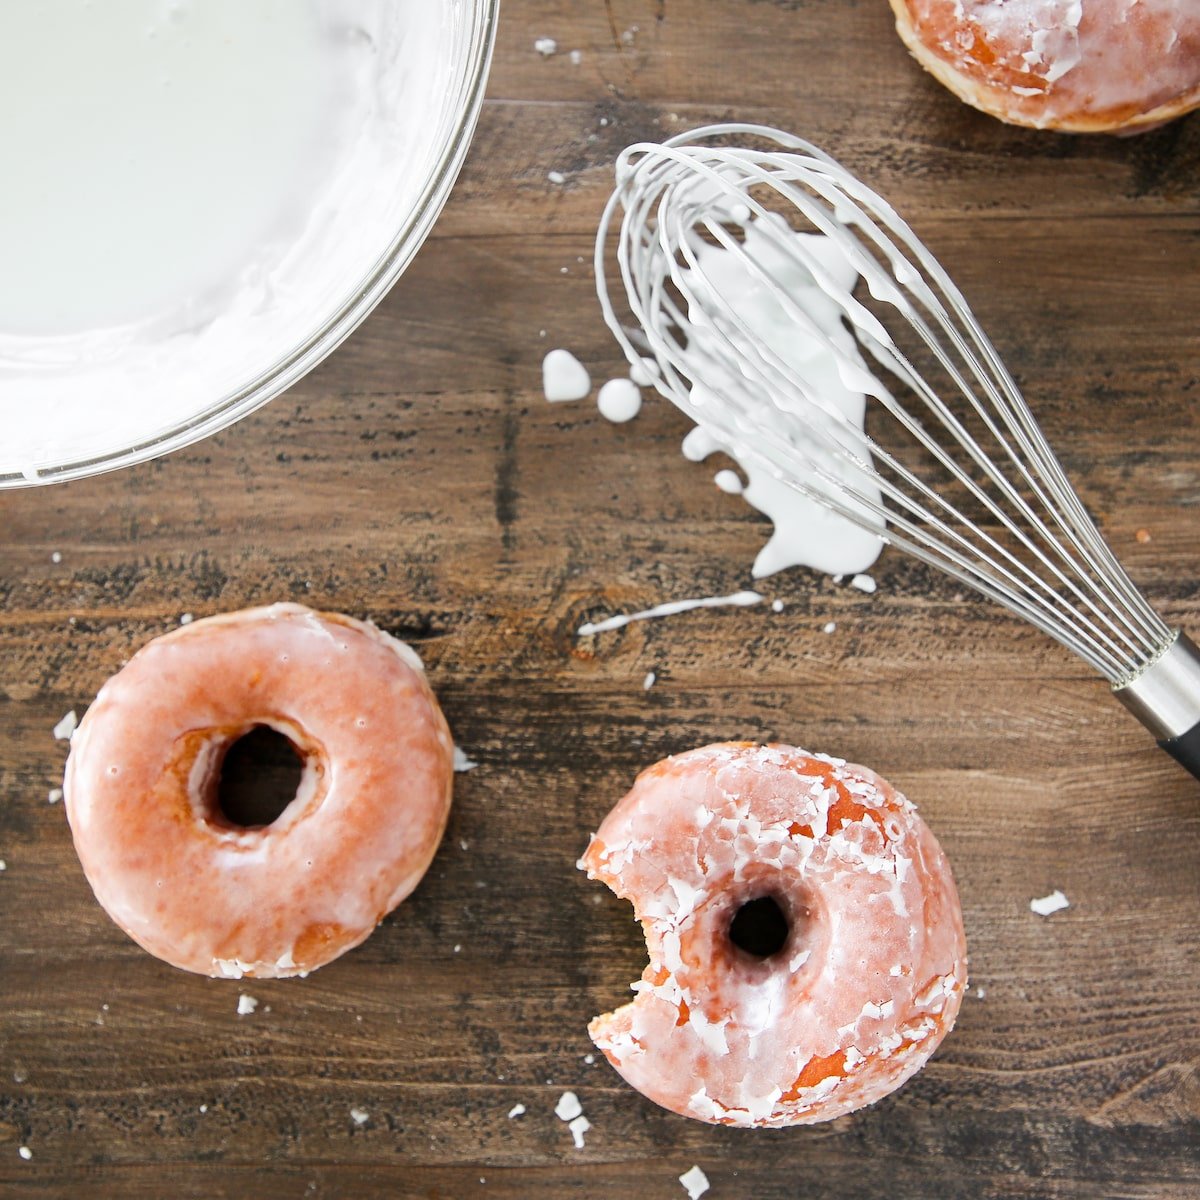 Classic Donut Glaze with yeasted donuts on wood board.